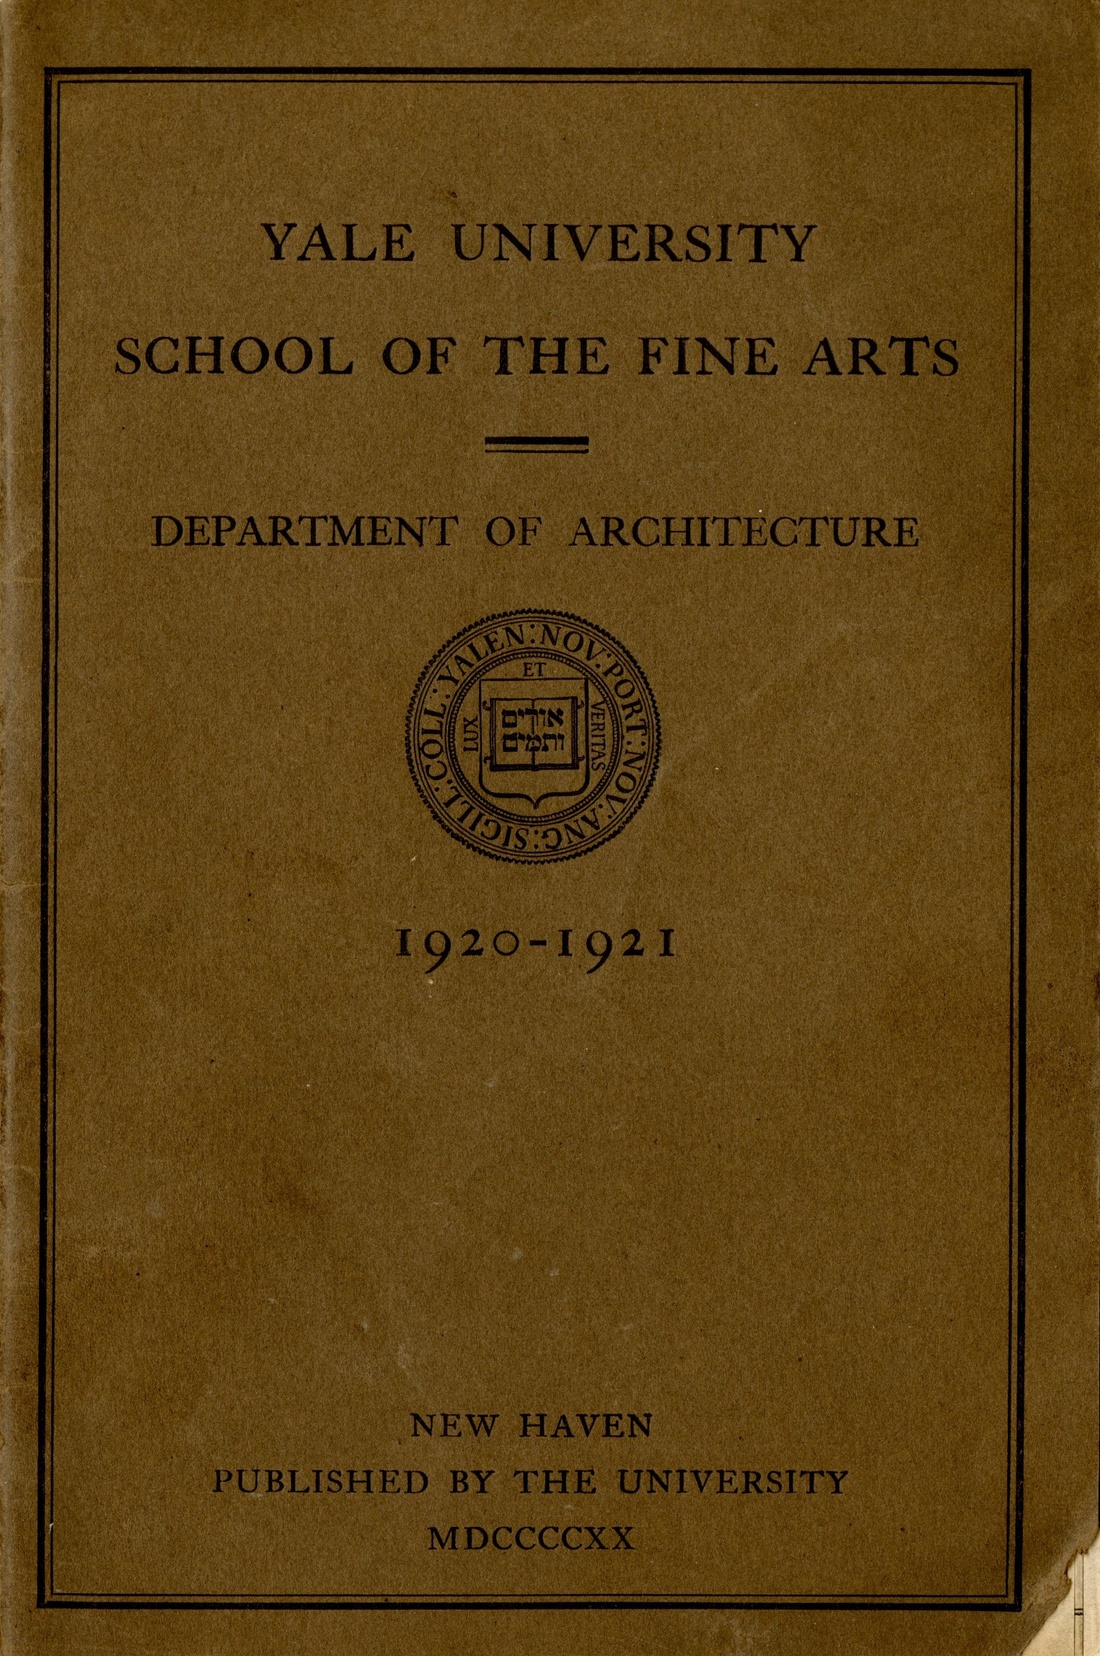 Cover of School Bulletin from 1920